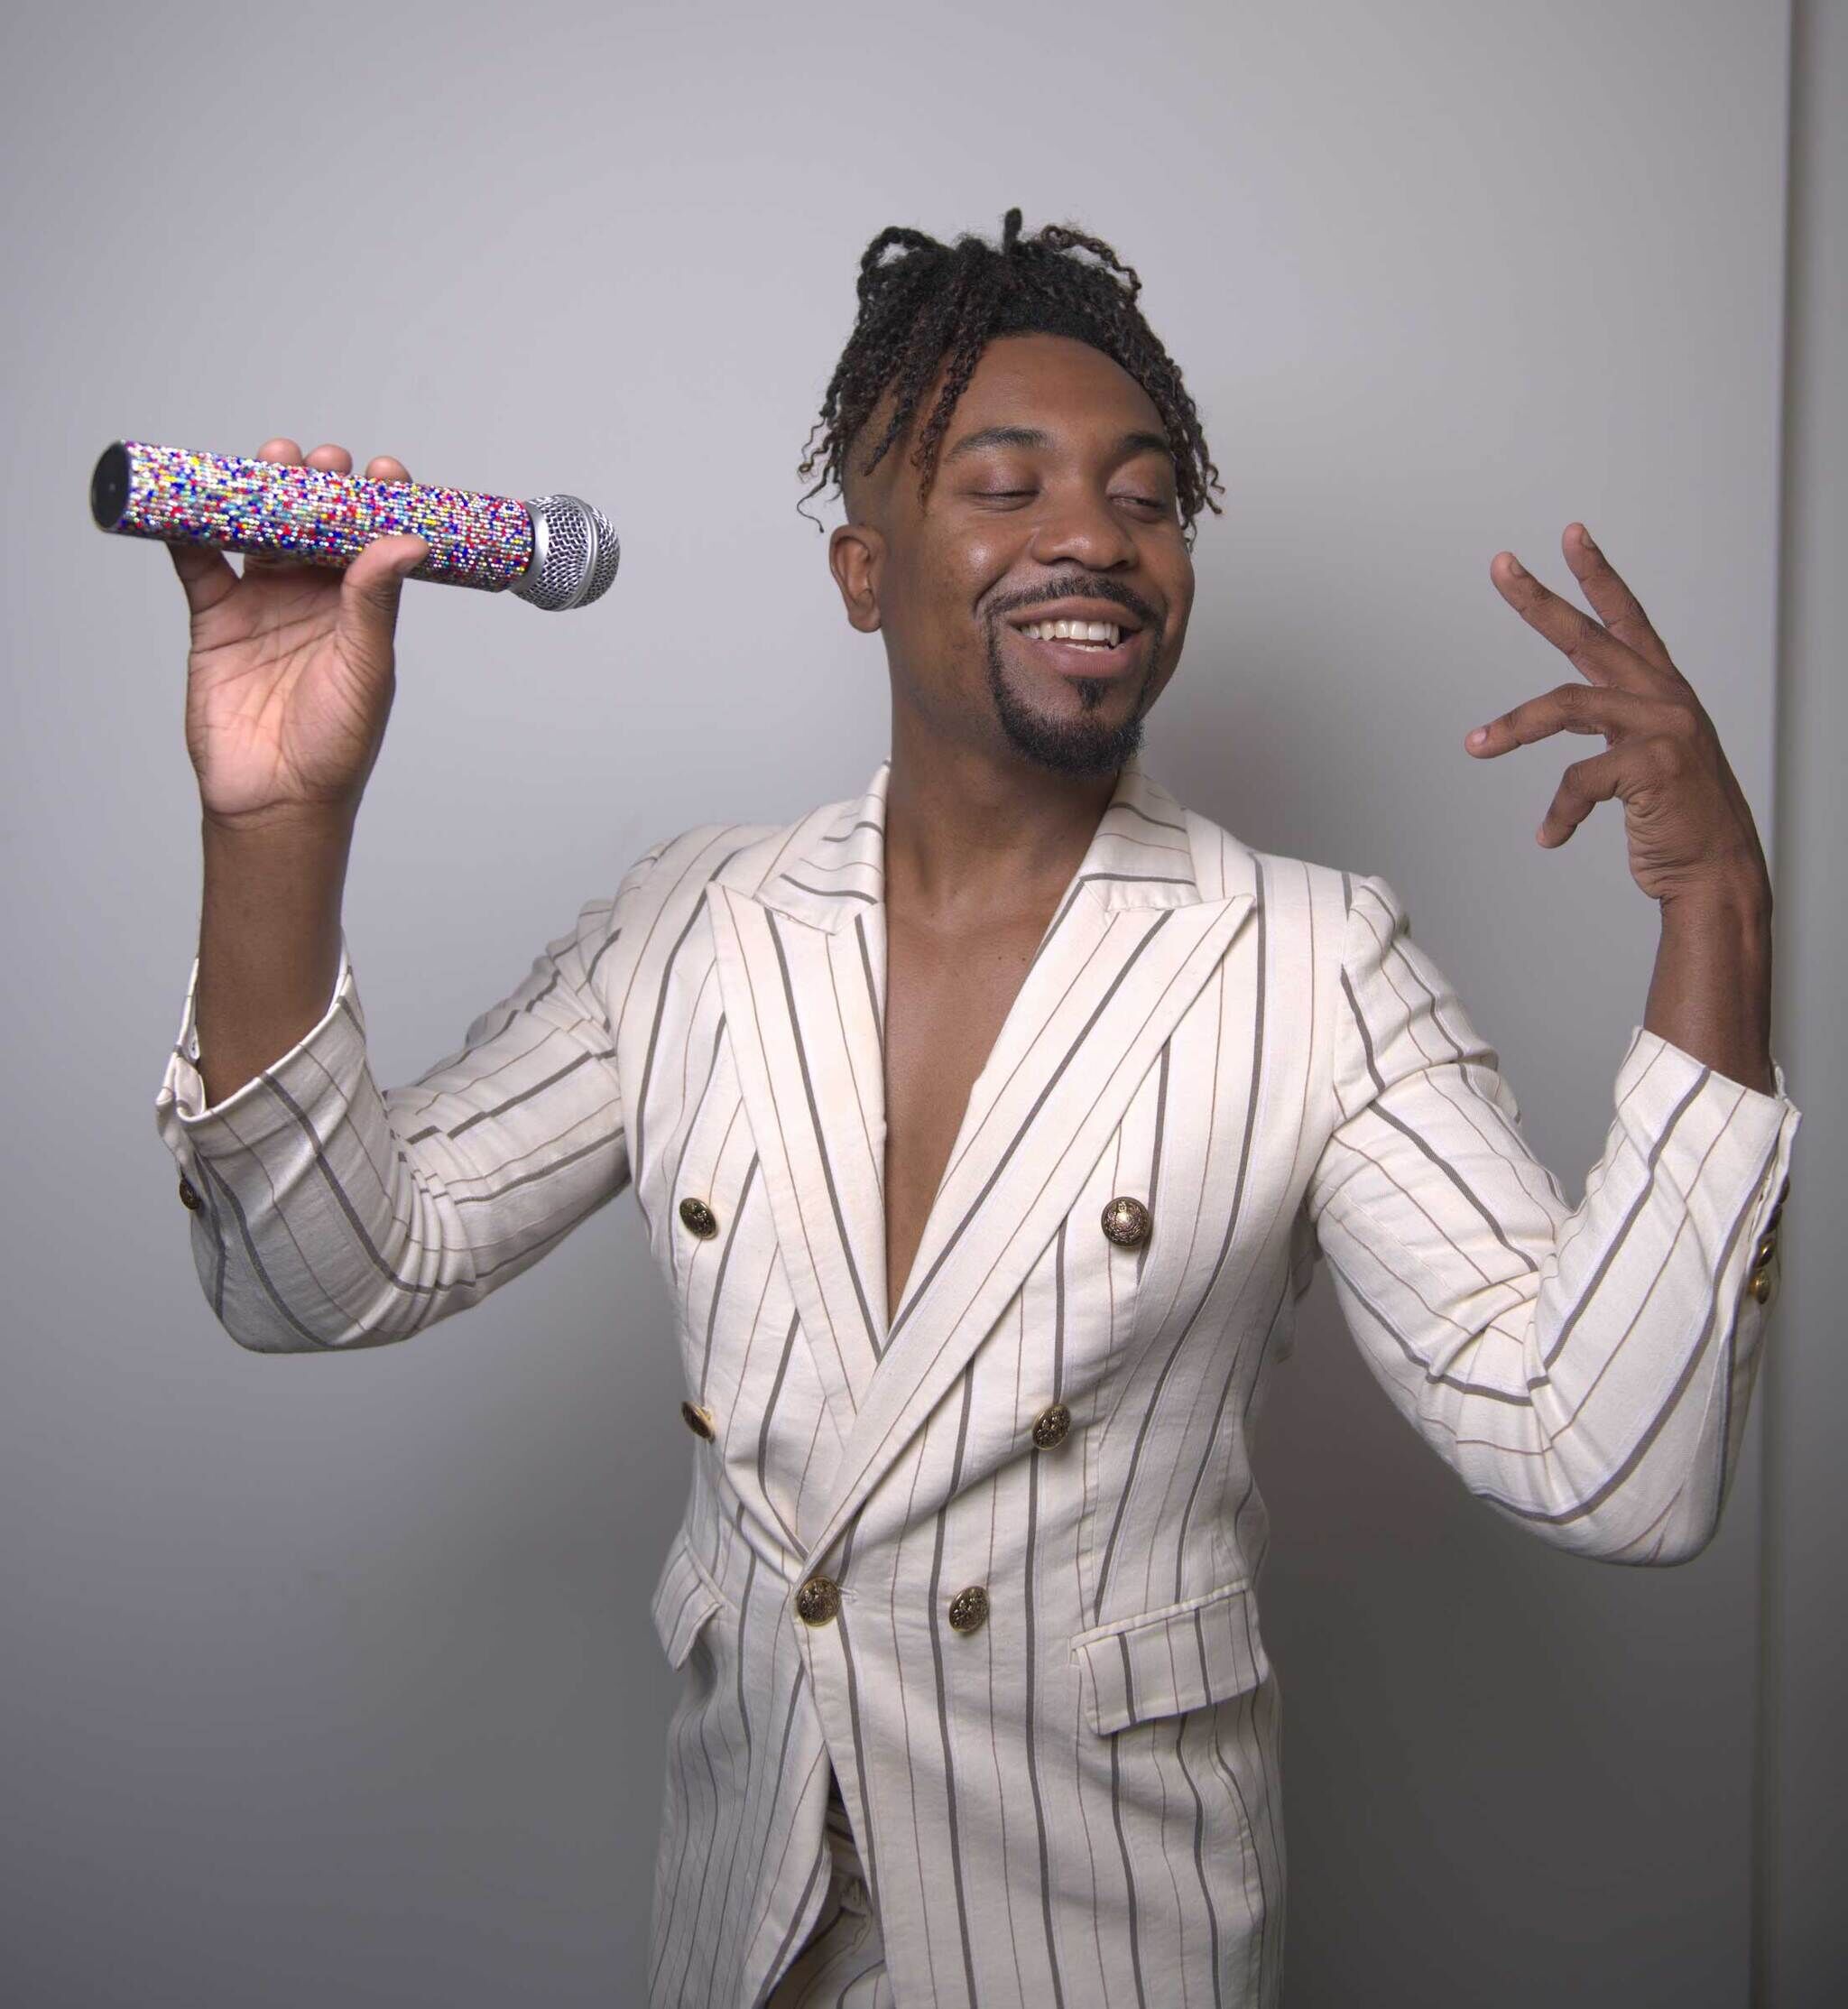 A smiling African American vocalist with his head slightly turned and eyes shut radiates joy. The vocalist is wearing a pin-striped blazer without a shirt underneath and has a braided updo slightly framing his face. He is posing with a multi-colored bedazzled microphone in one hand and the other is in an artistic hand gesture.